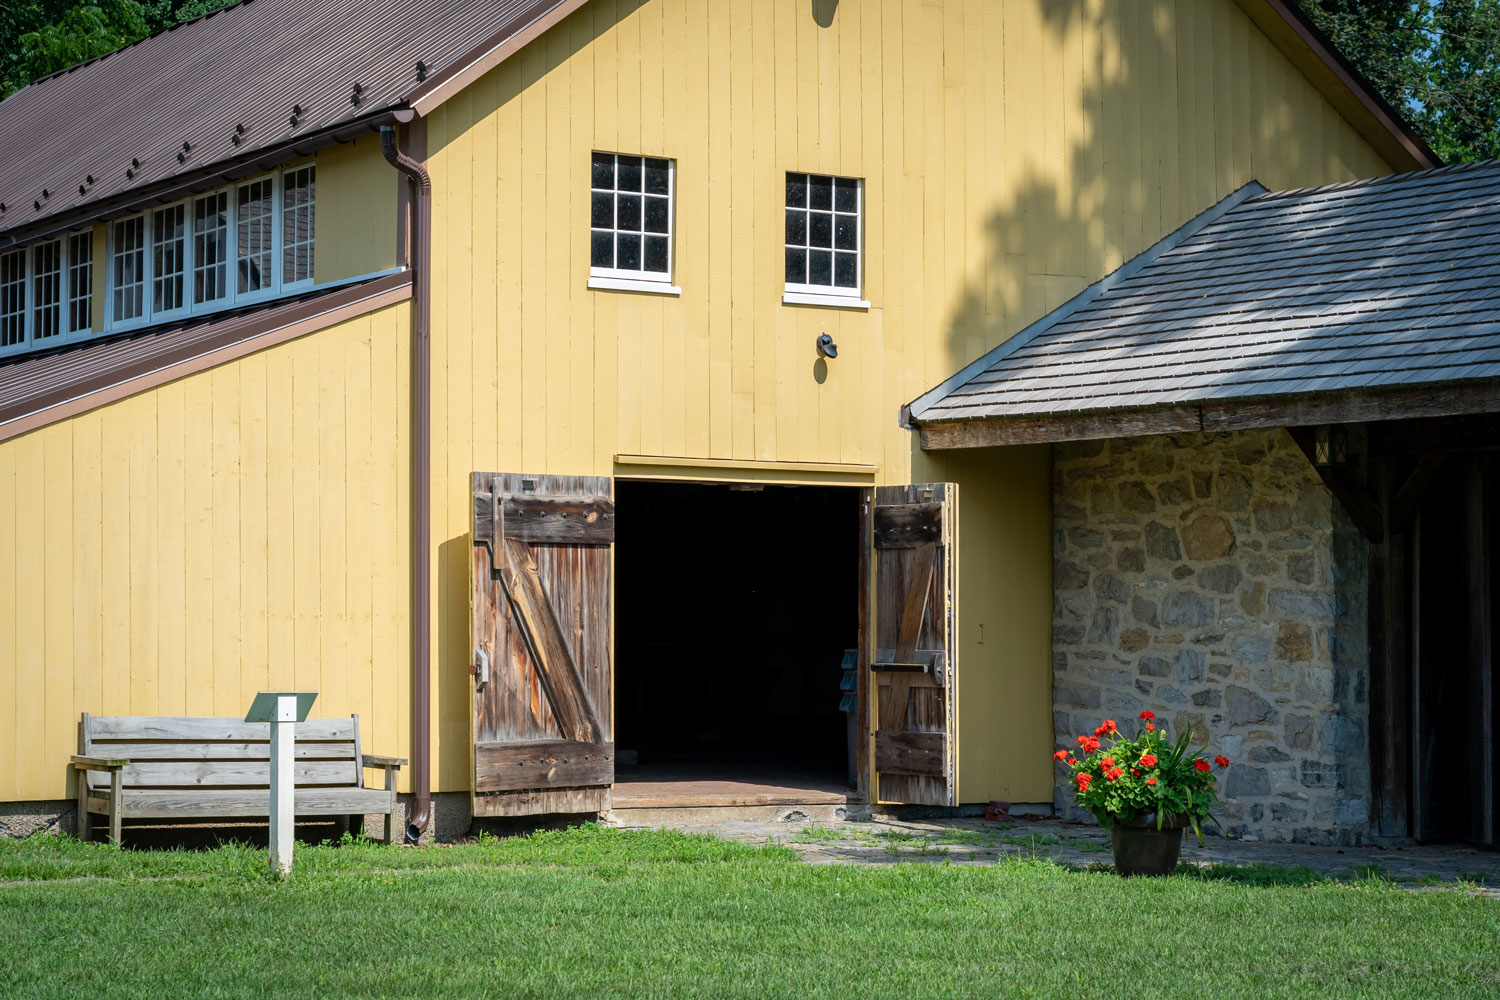 A yellow painted wooden siding barn house with opened wooden doors